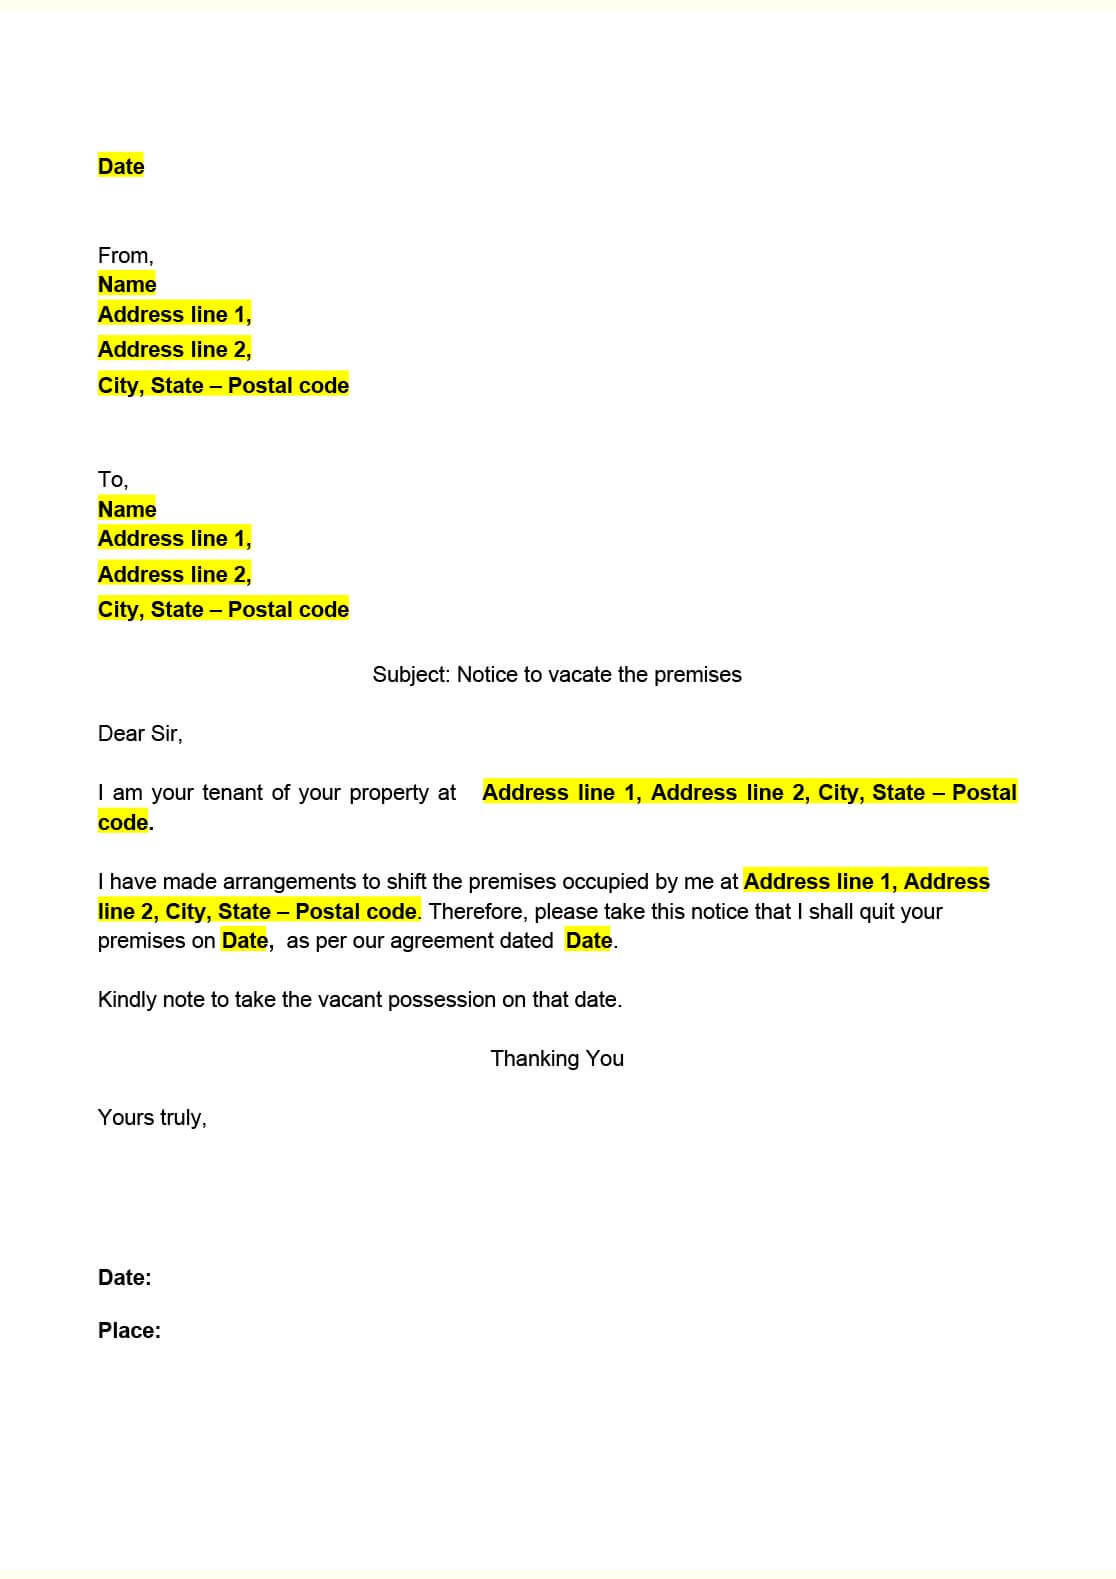 Sample Letter To Vacate Property from www.indiafilings.com